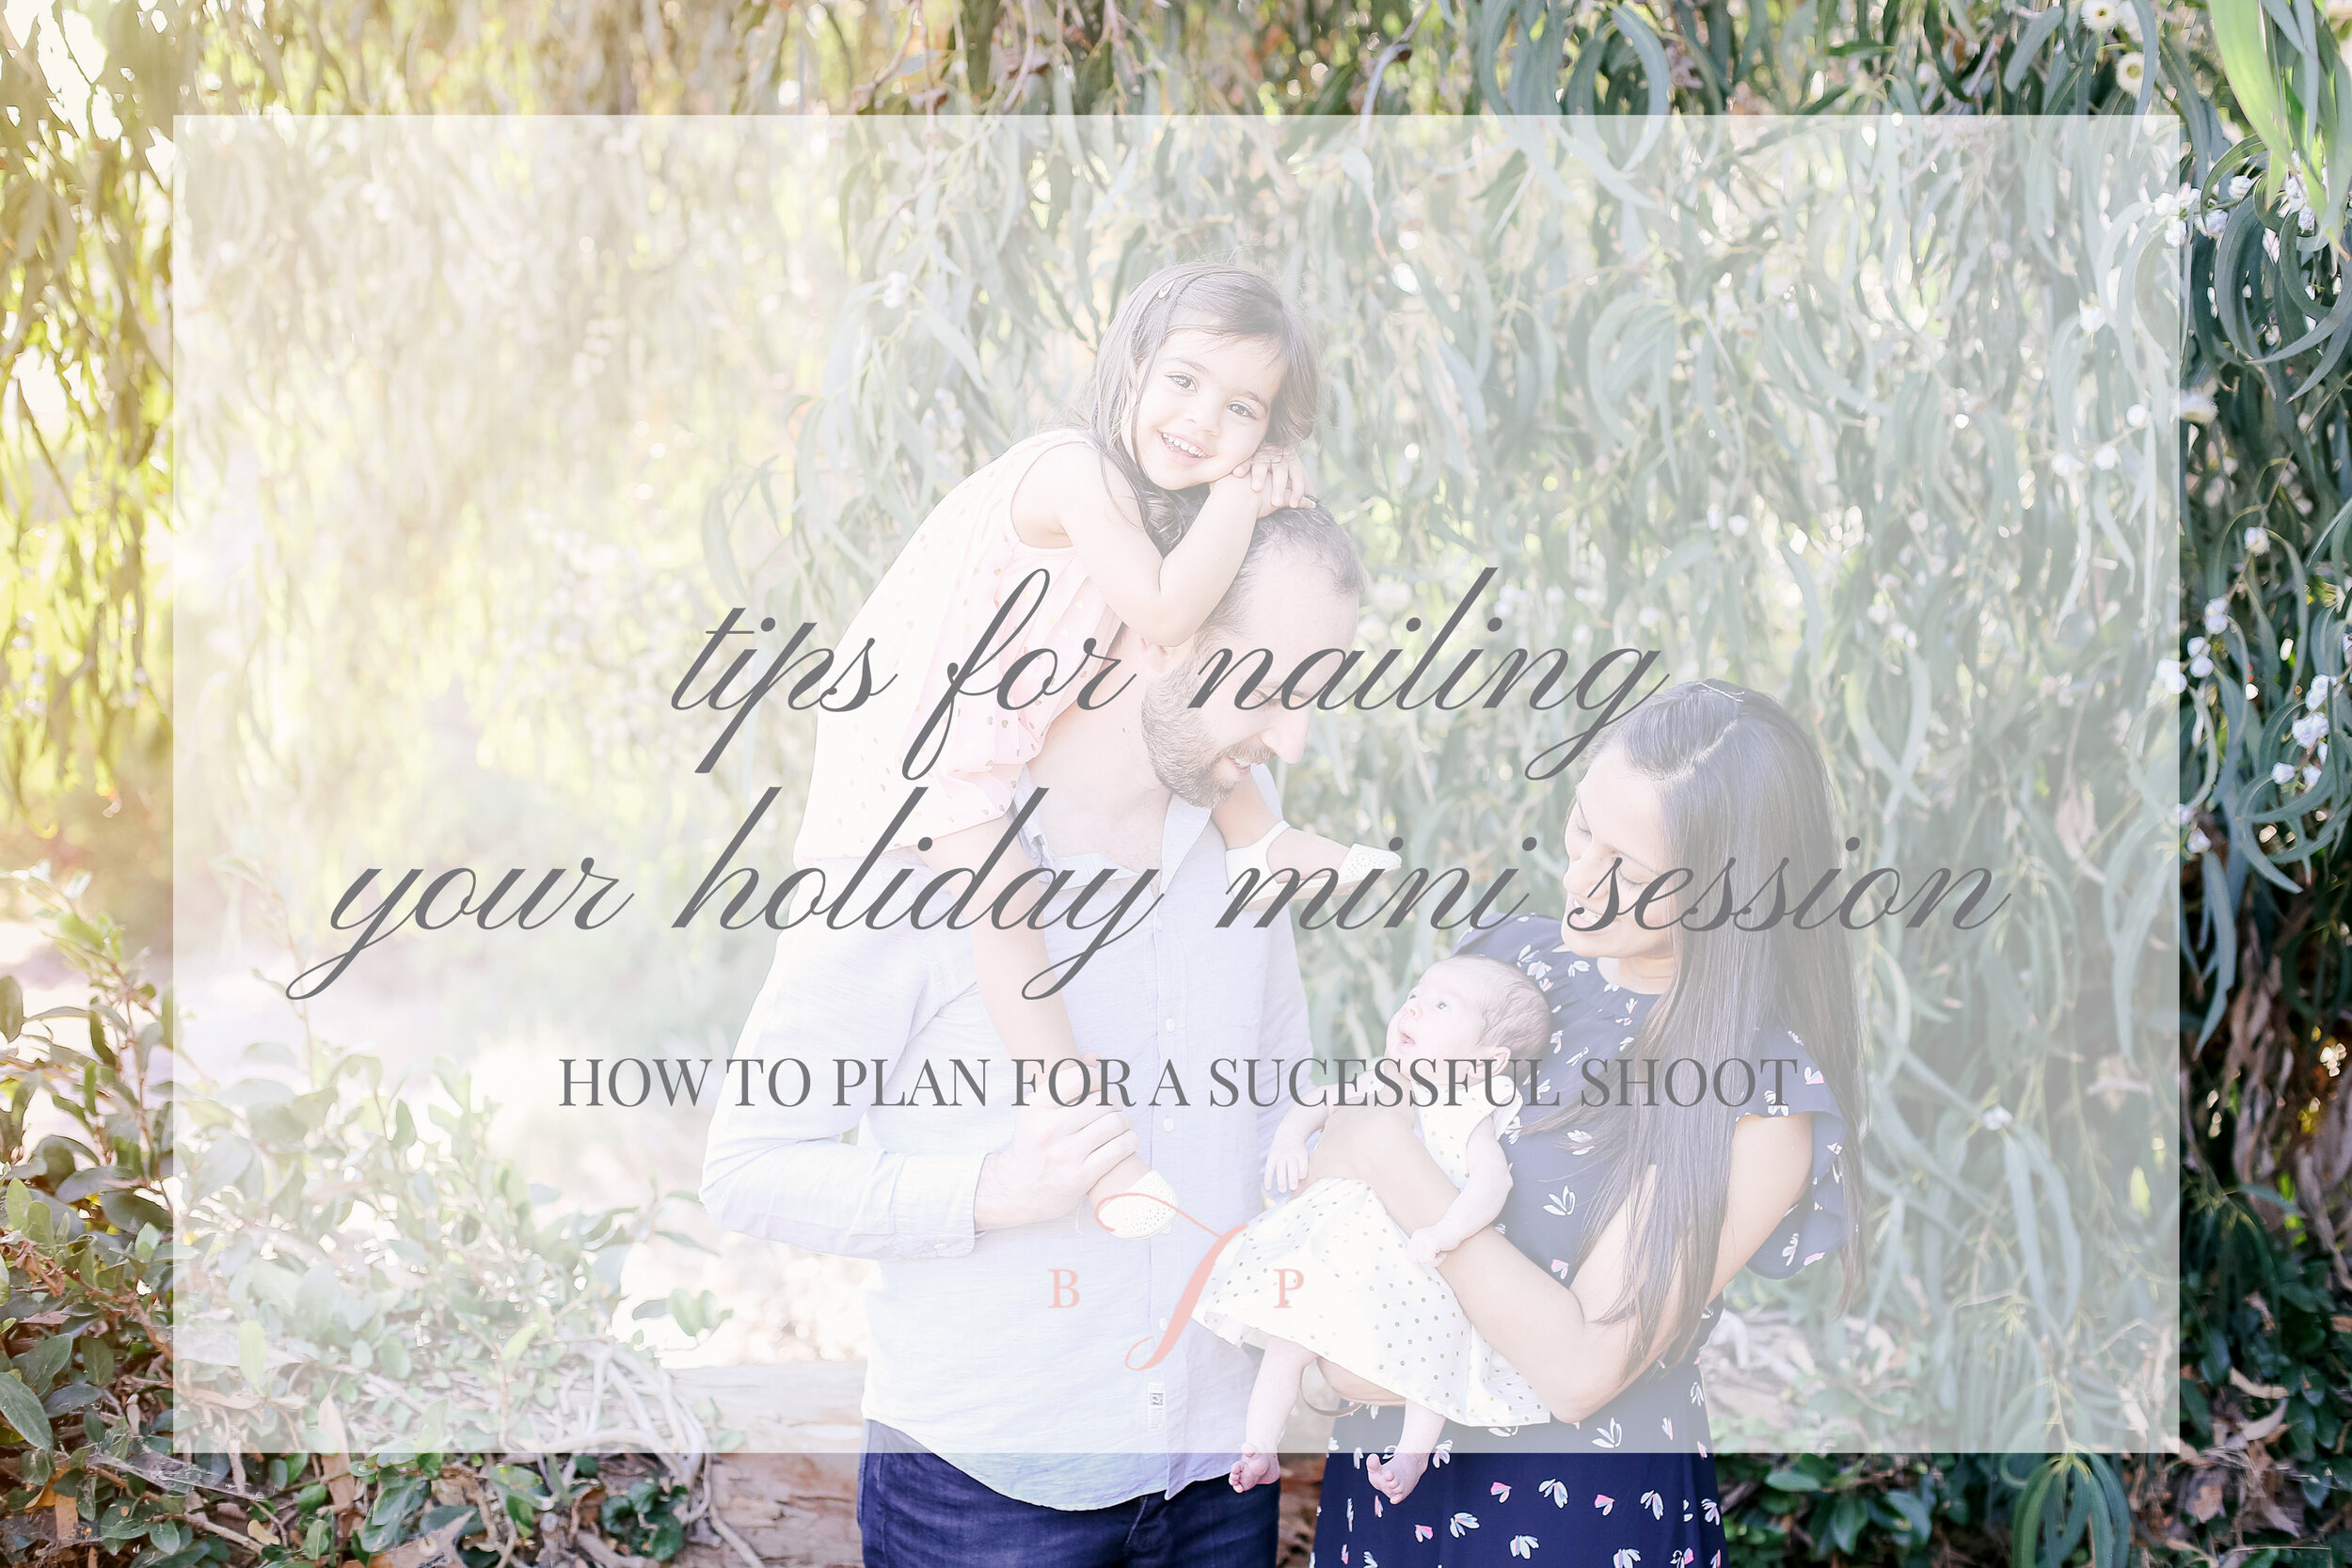 TIPS-FOR-NAILING-YOUR-HOLIDAY-MINI-SESSION-HOLIDAY-MINIS-2019-BROOKE-TOBIN-PHOTOGRAPHY_03.jpg